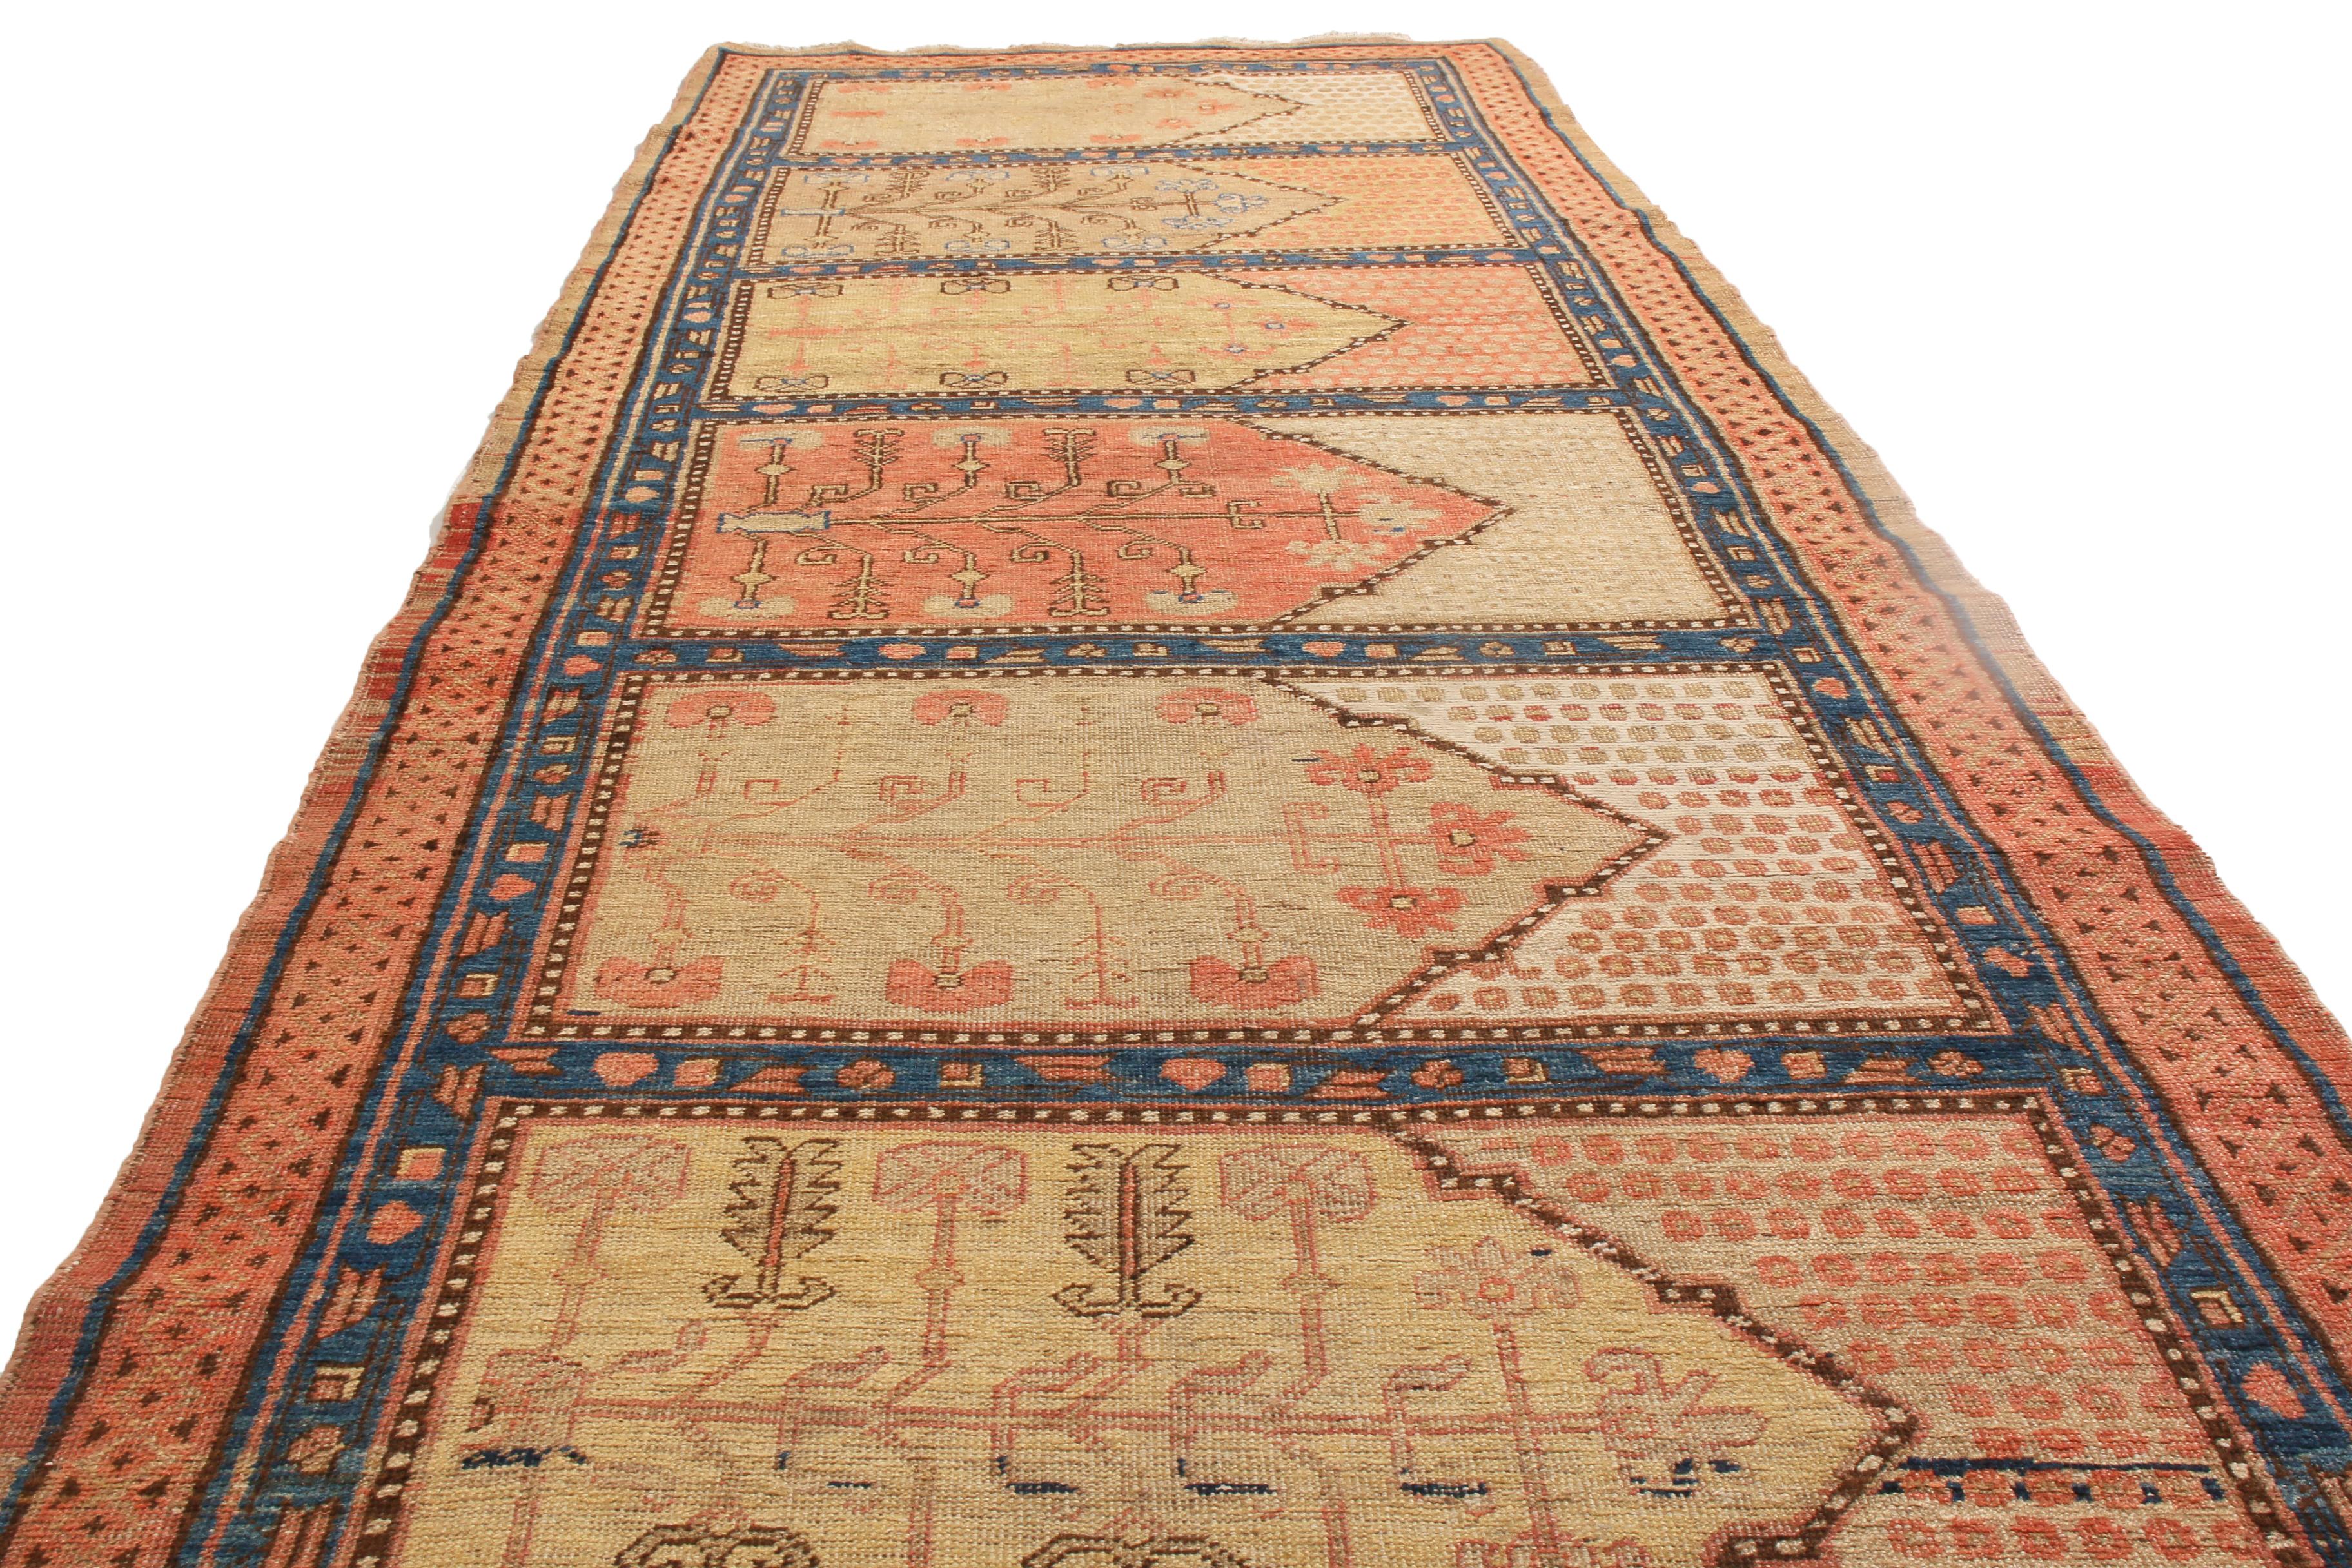 Hand knotted in high quality wool and originating from East Turkestan in 1920, this antique Khotan runner features a notably unique and subversive field design with horizontal medallion patterns. Uncommon to transitional Khotan designs typically